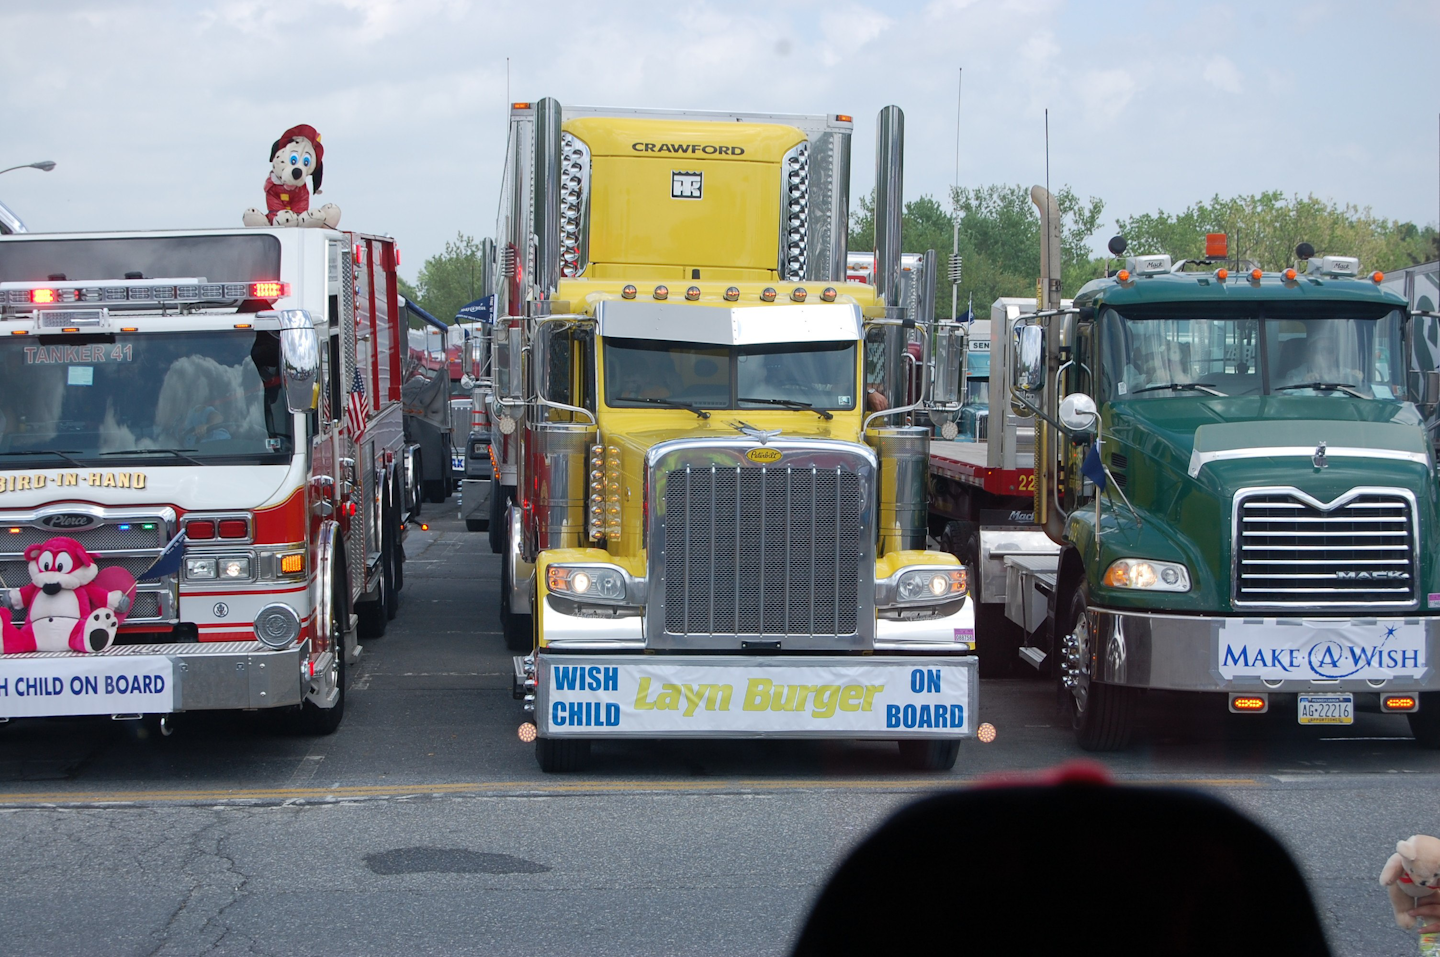 Mother’s Day Convoy 380 trucks help raise 300,000 for MakeAWish